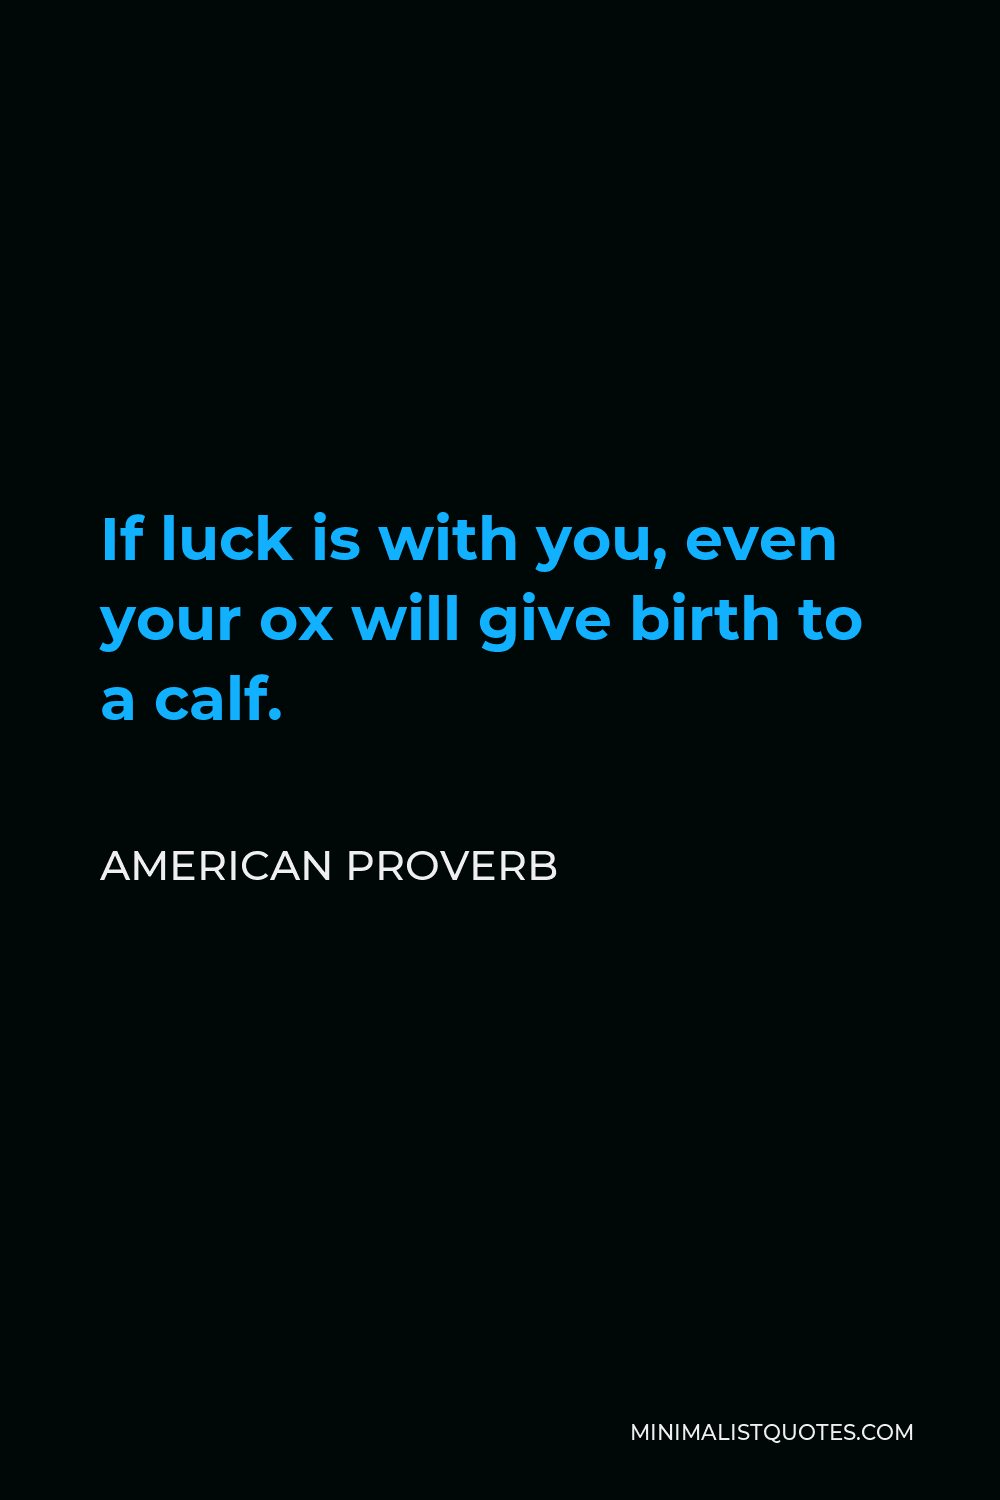 American Proverb Quote - If luck is with you, even your ox will give birth to a calf.